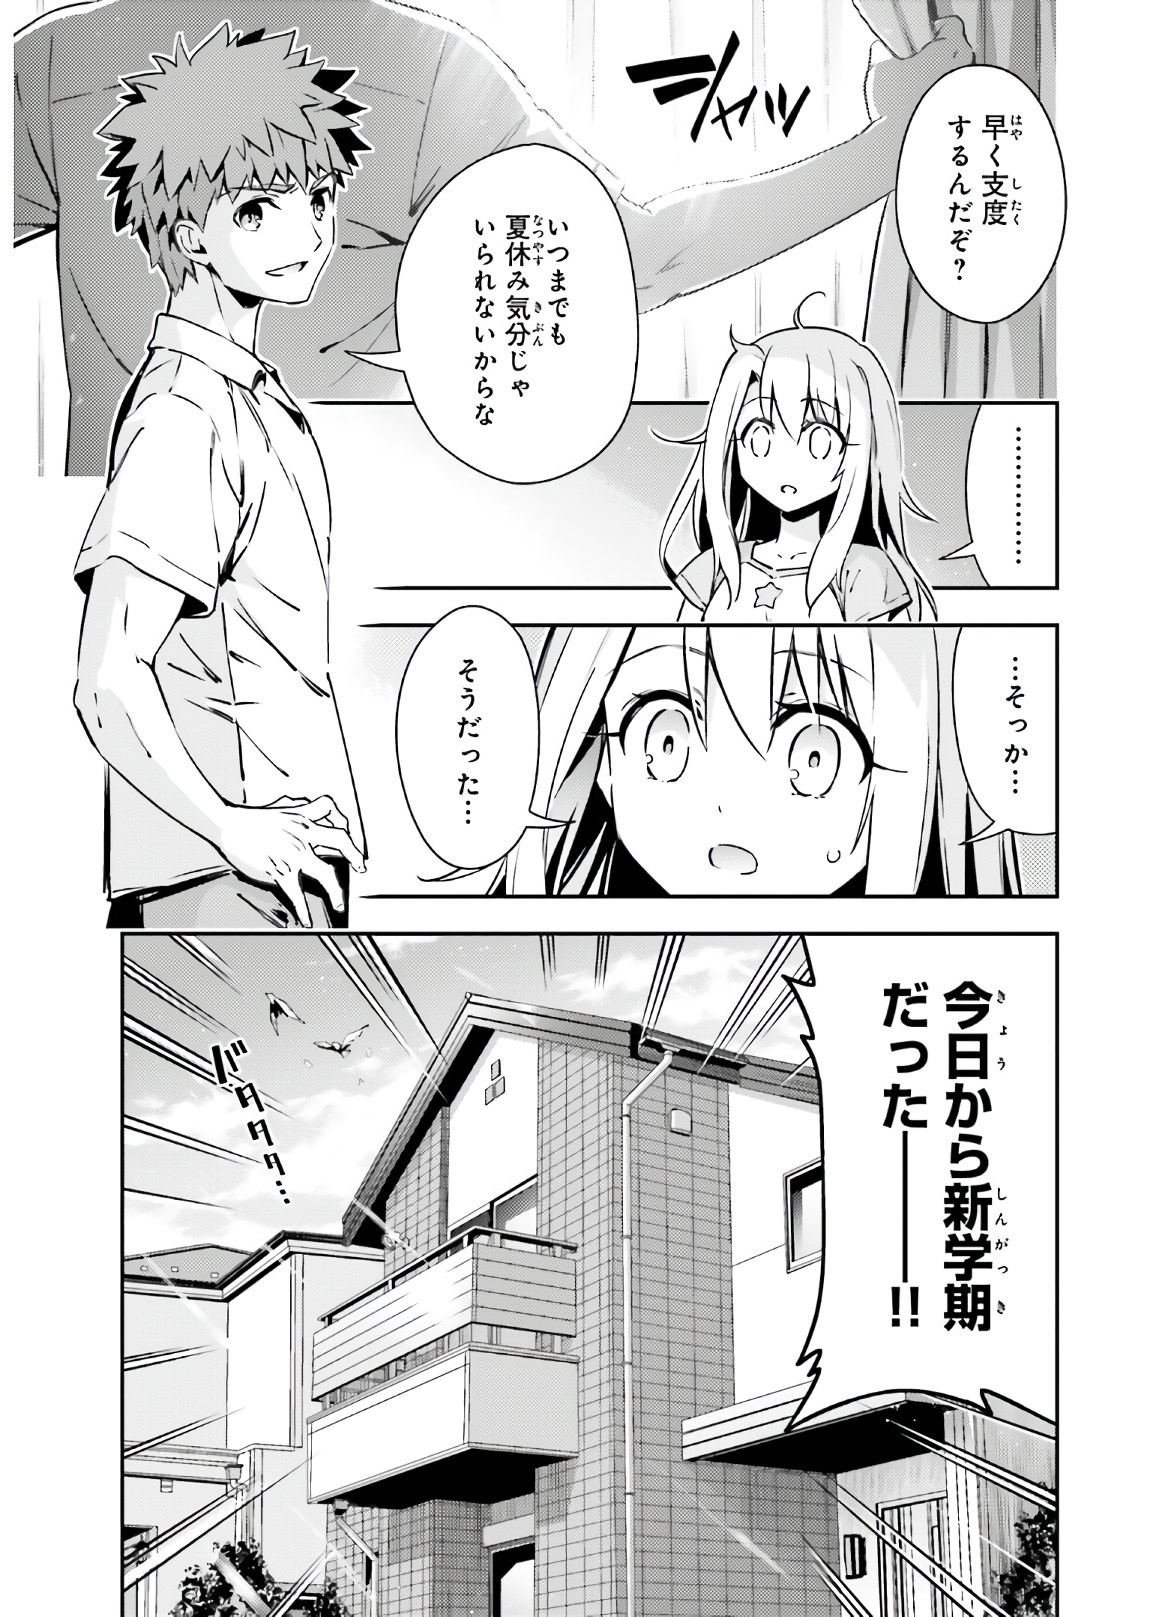 Fate/Kaleid Liner Prisma Illya Drei! - Chapter 61 - Page 3